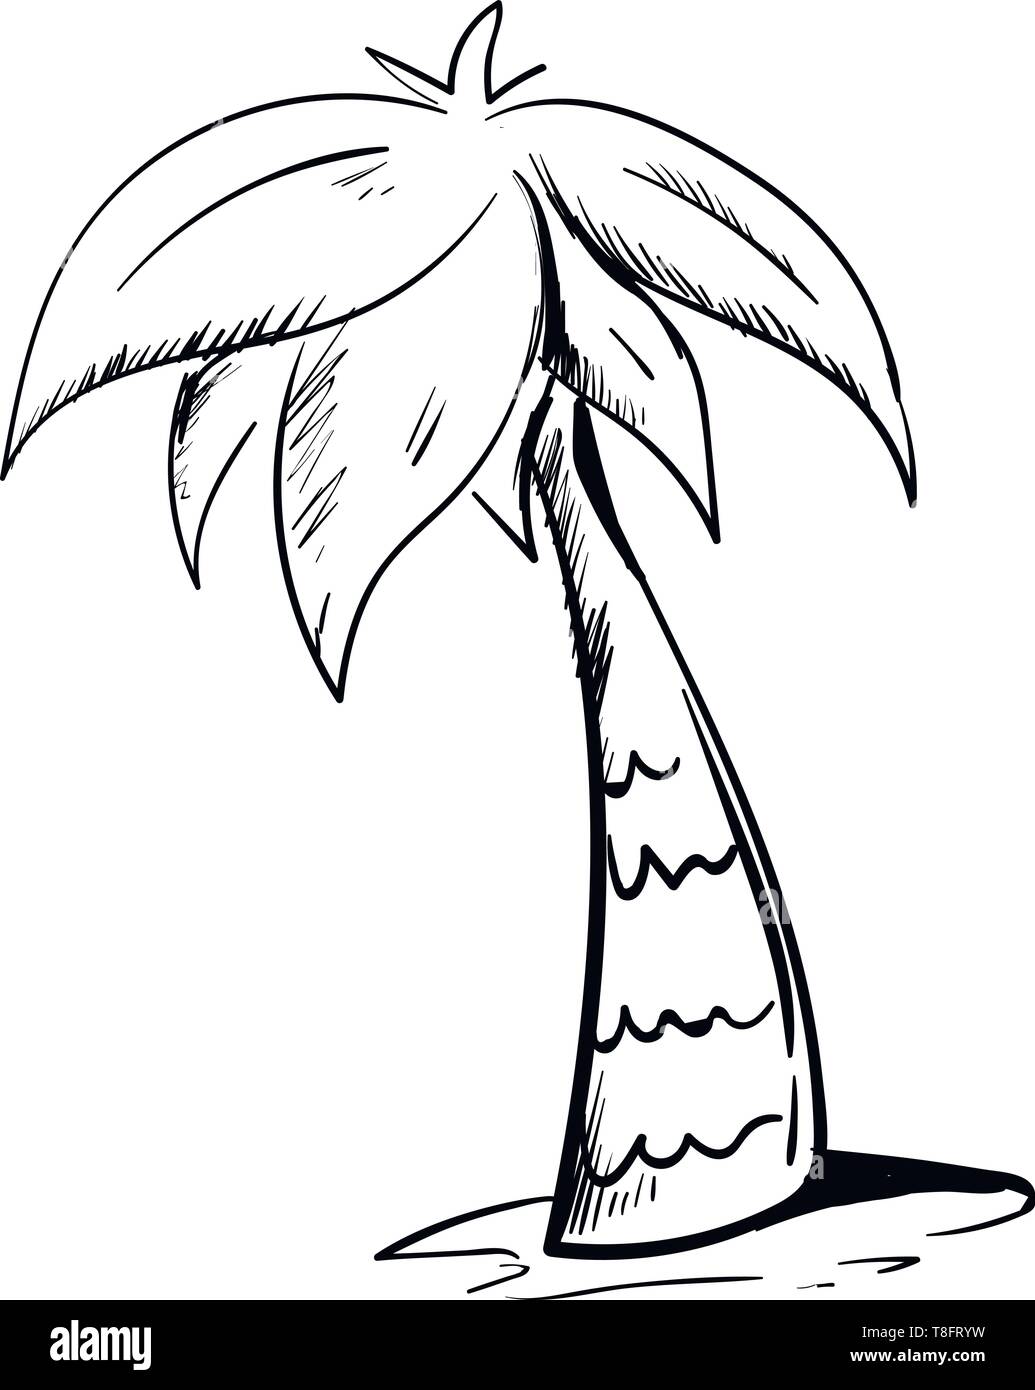 Sketch A palm tree has a crown of very long feathered or fan-shaped leaves has a sturdy trunk and grows above the soil over white background, vector,  Stock Vector